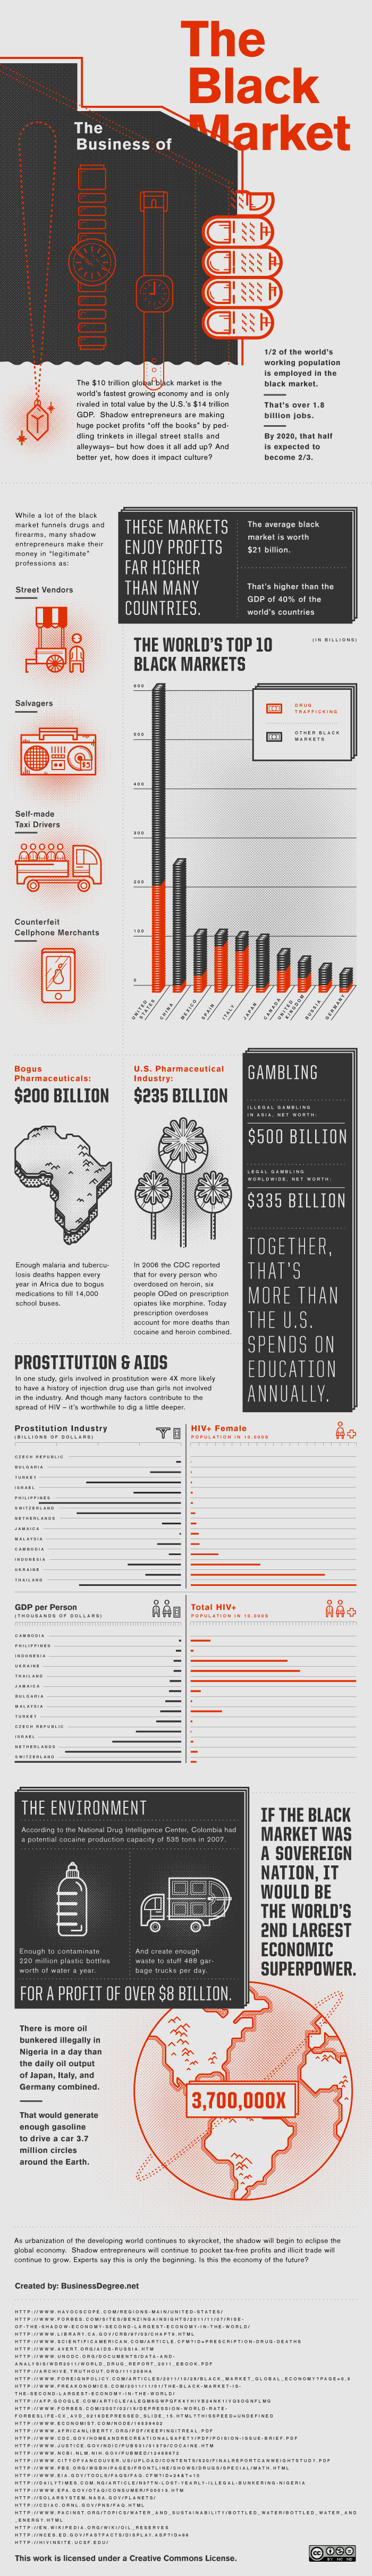 The Business of the Black Market Infographic